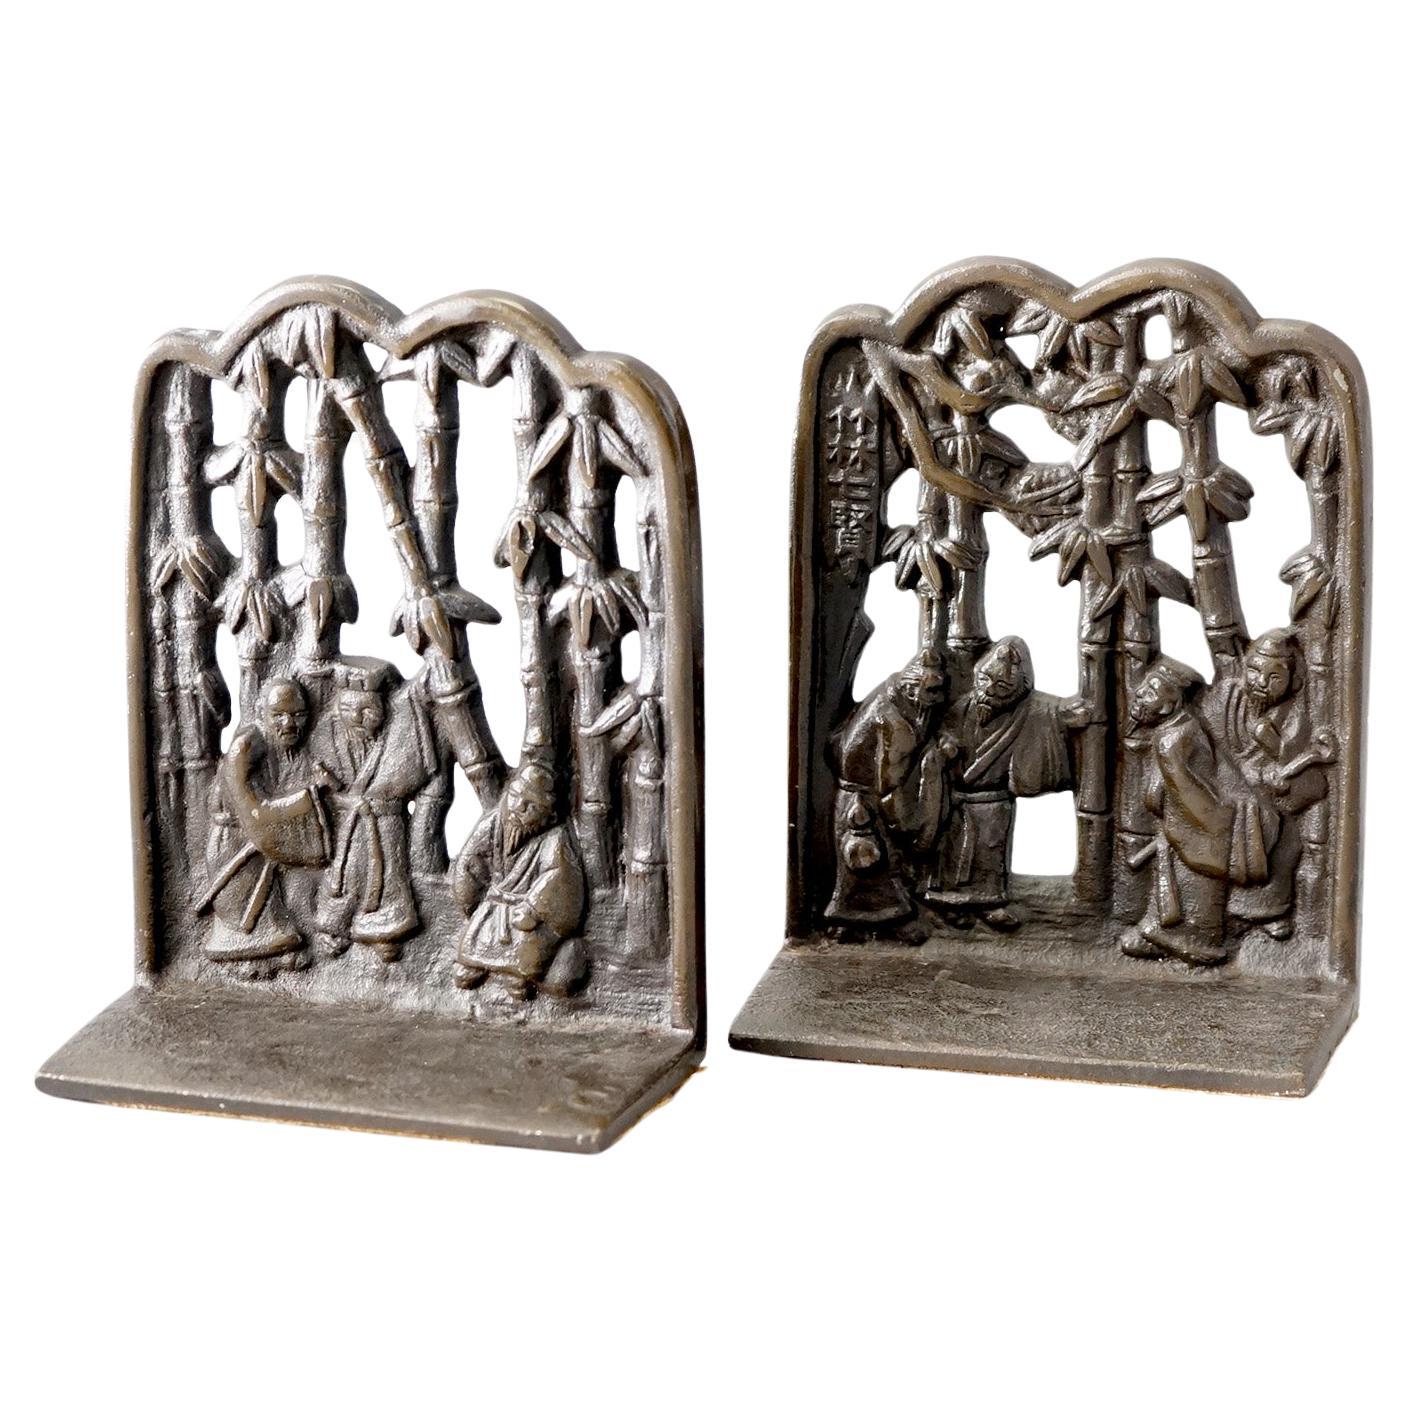  Pair of Chinese Cast Bronze Bookends with Figures & Bamboo, C1920